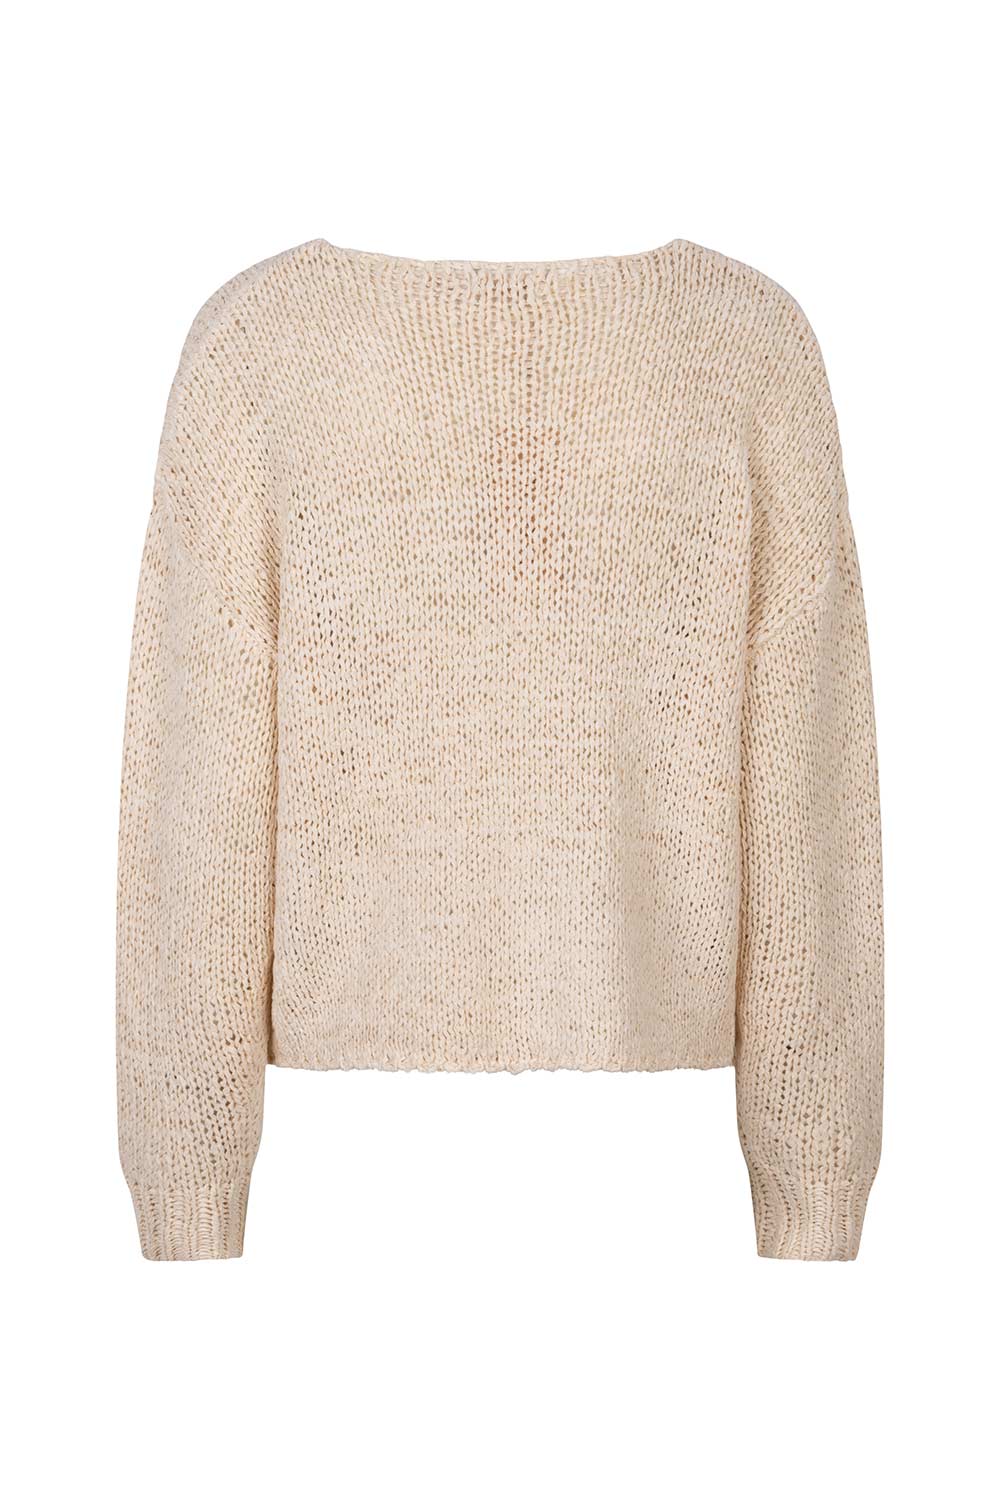 Back of Esqualo (SP2418101) Women's Long Sleeve Loose Knit Tape Yarn Sweater With Drop Shoulders and Relaxed fit in Sand Beige